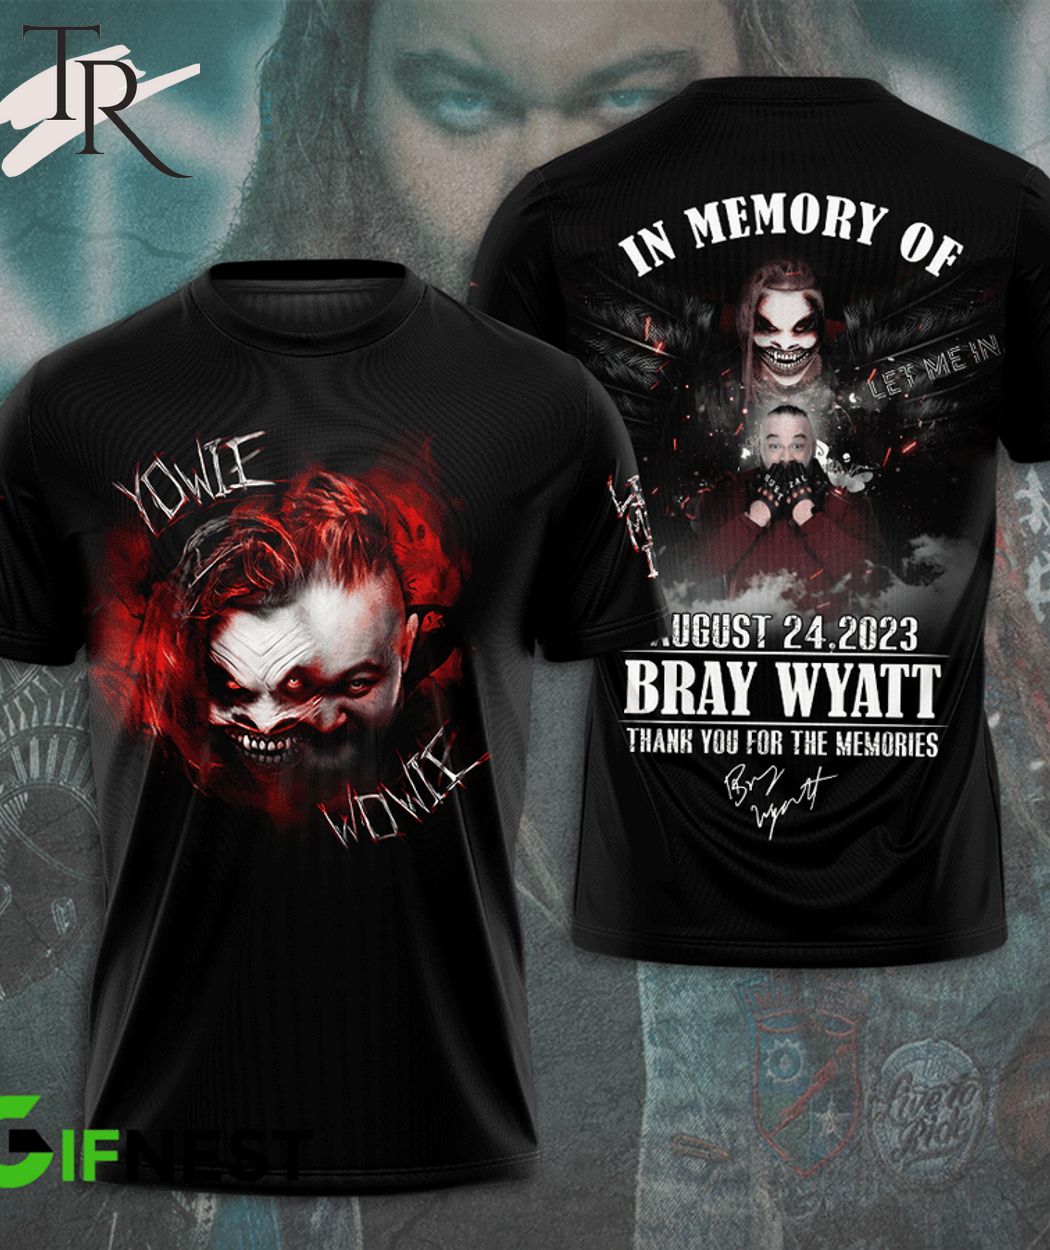 https://images.torunstyle.com/wp-content/uploads/2023/08/28090416/yowie-wowie-in-memory-of-august-24-2023-bray-wyatt-thank-you-for-the-memories-t-shirt-1-N2iBX.jpg